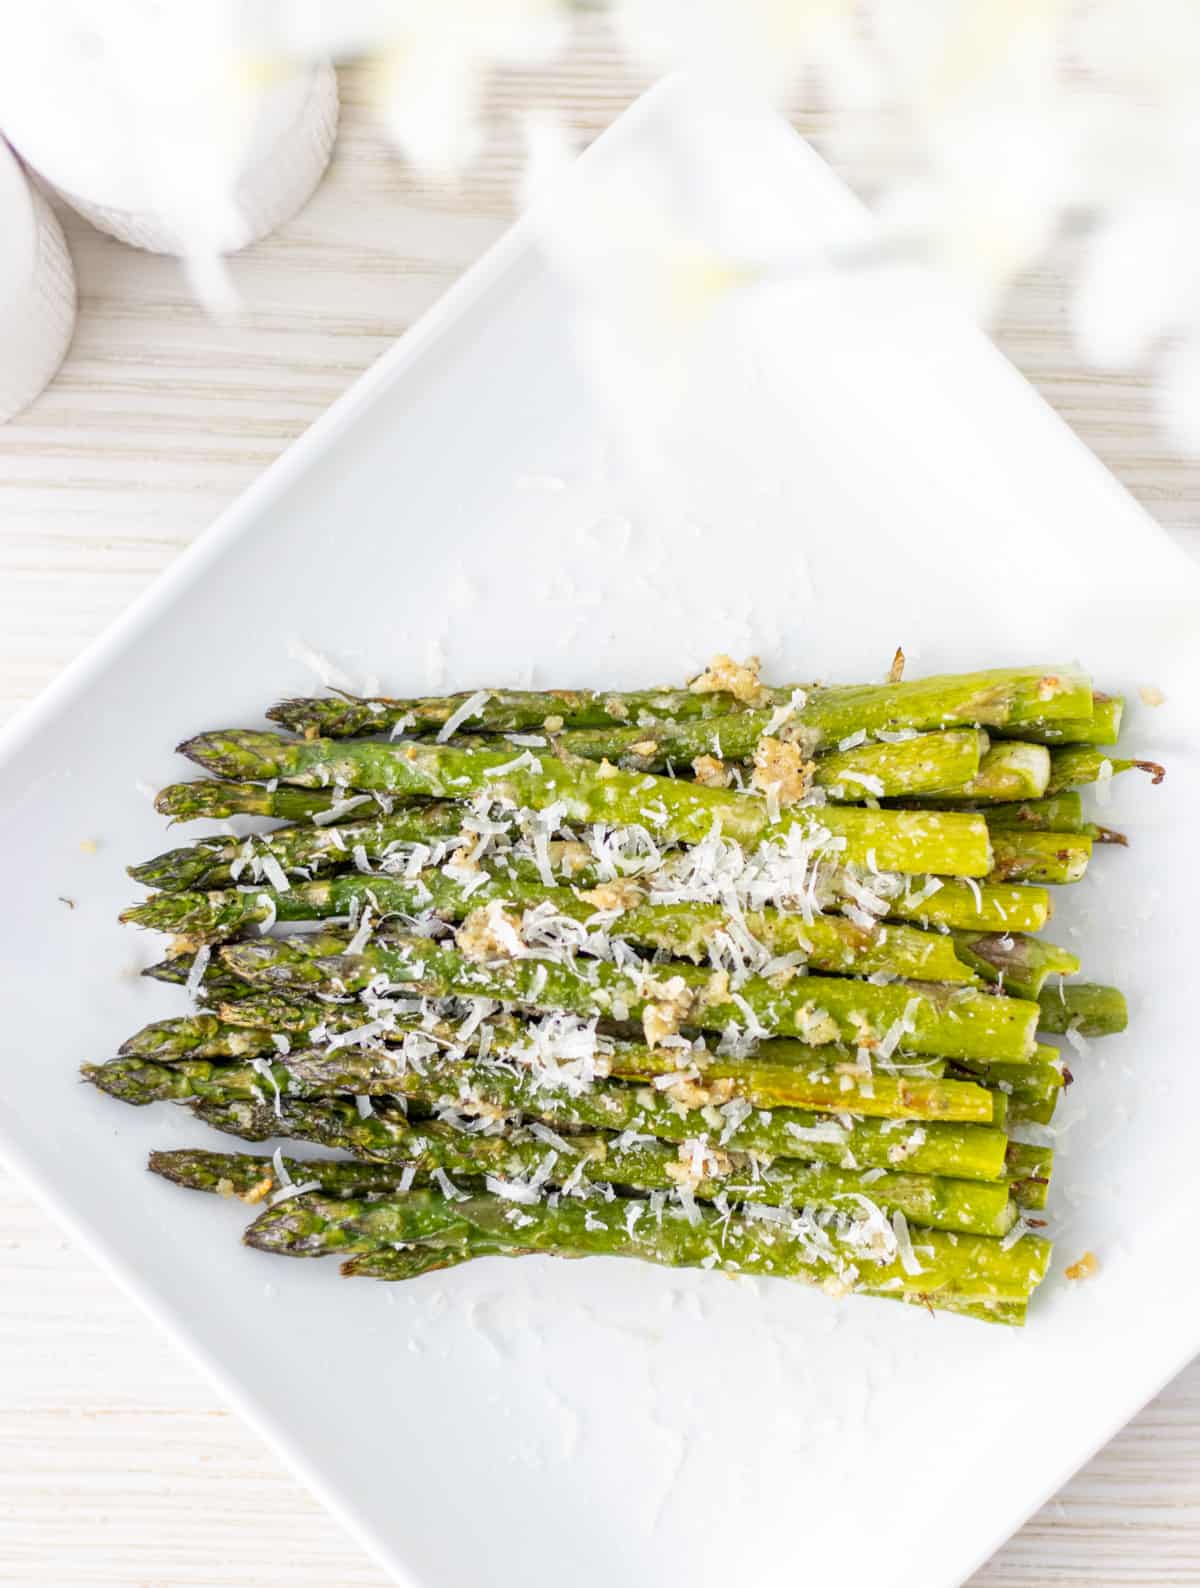 Asparagus on a plate topped with parmesan cheese.